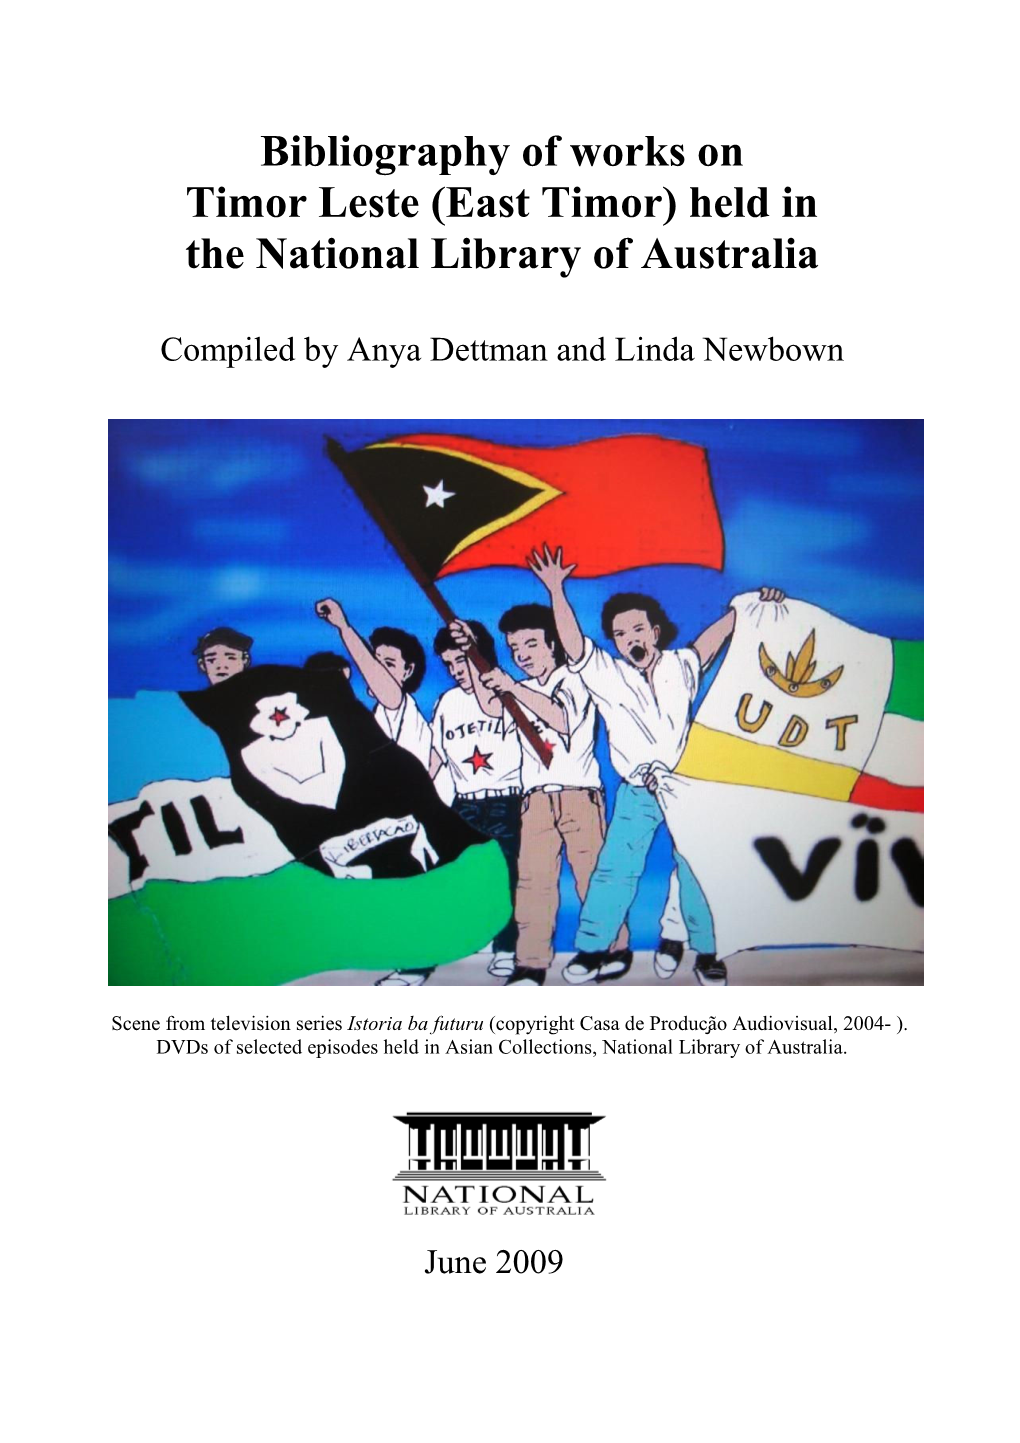 Bibliography of Works on Timor Leste (East Timor) Held in the National Library of Australia